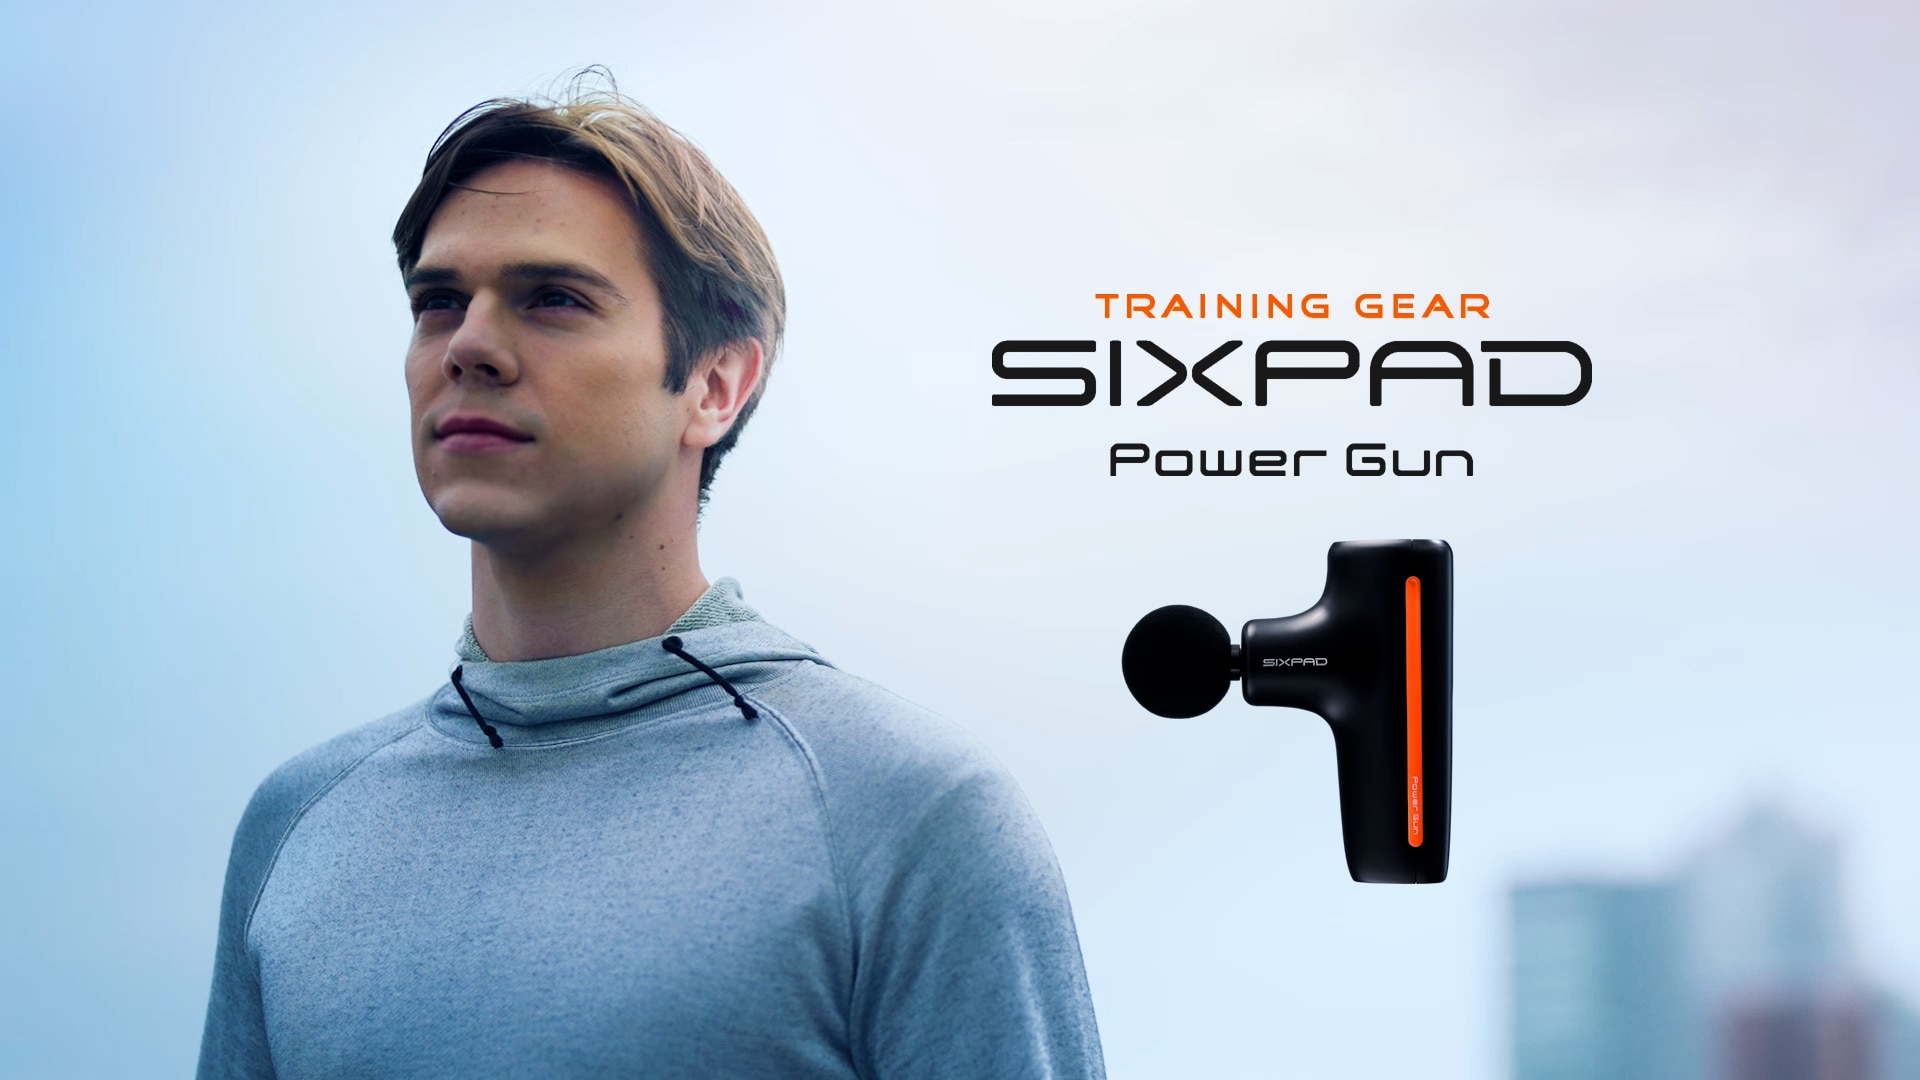 SIXPAD | Power Gun Product Edition (1 minute 40 seconds)